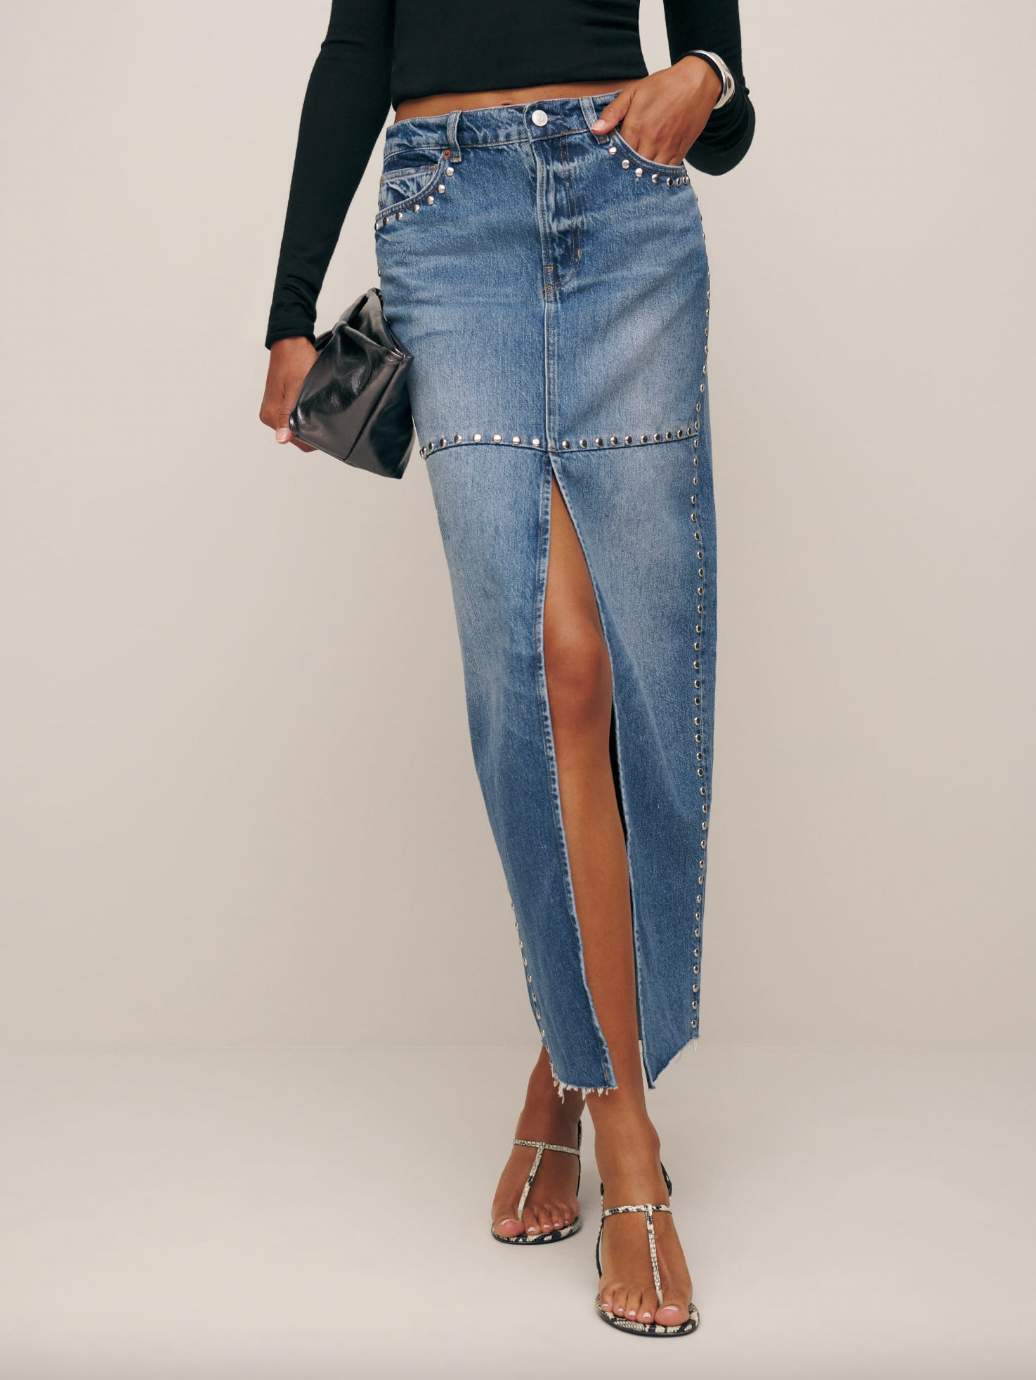 OK, so denim maxi skirts are in, and these 5 styles are all under $50 on